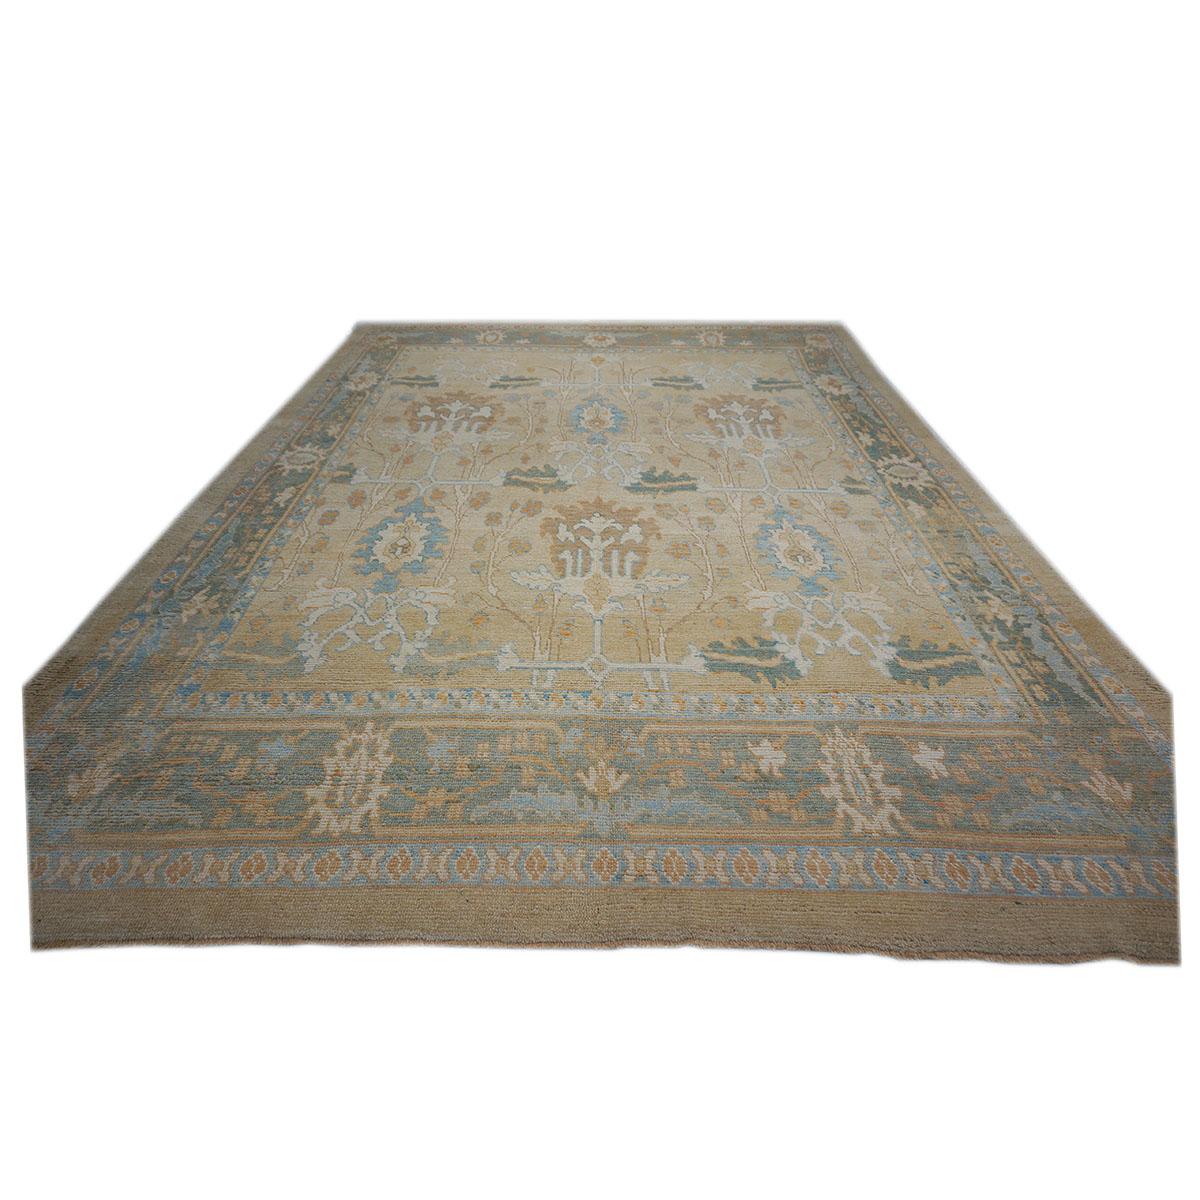 Hand-Woven 21st Century William Morris Donegal Carpet Ivory and Tan For Sale